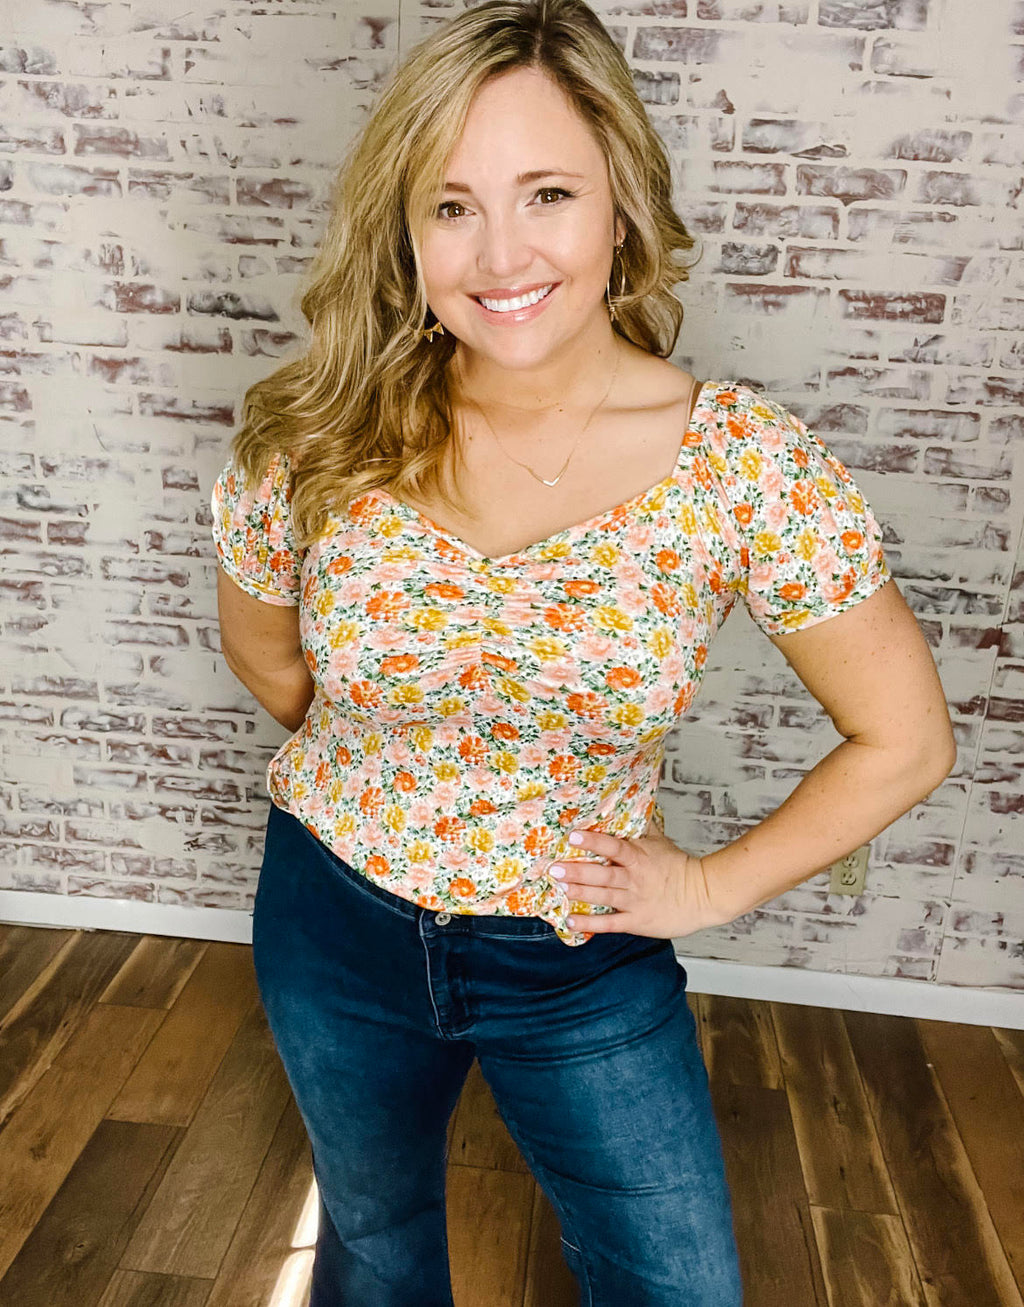 Fabulous in Floral Top